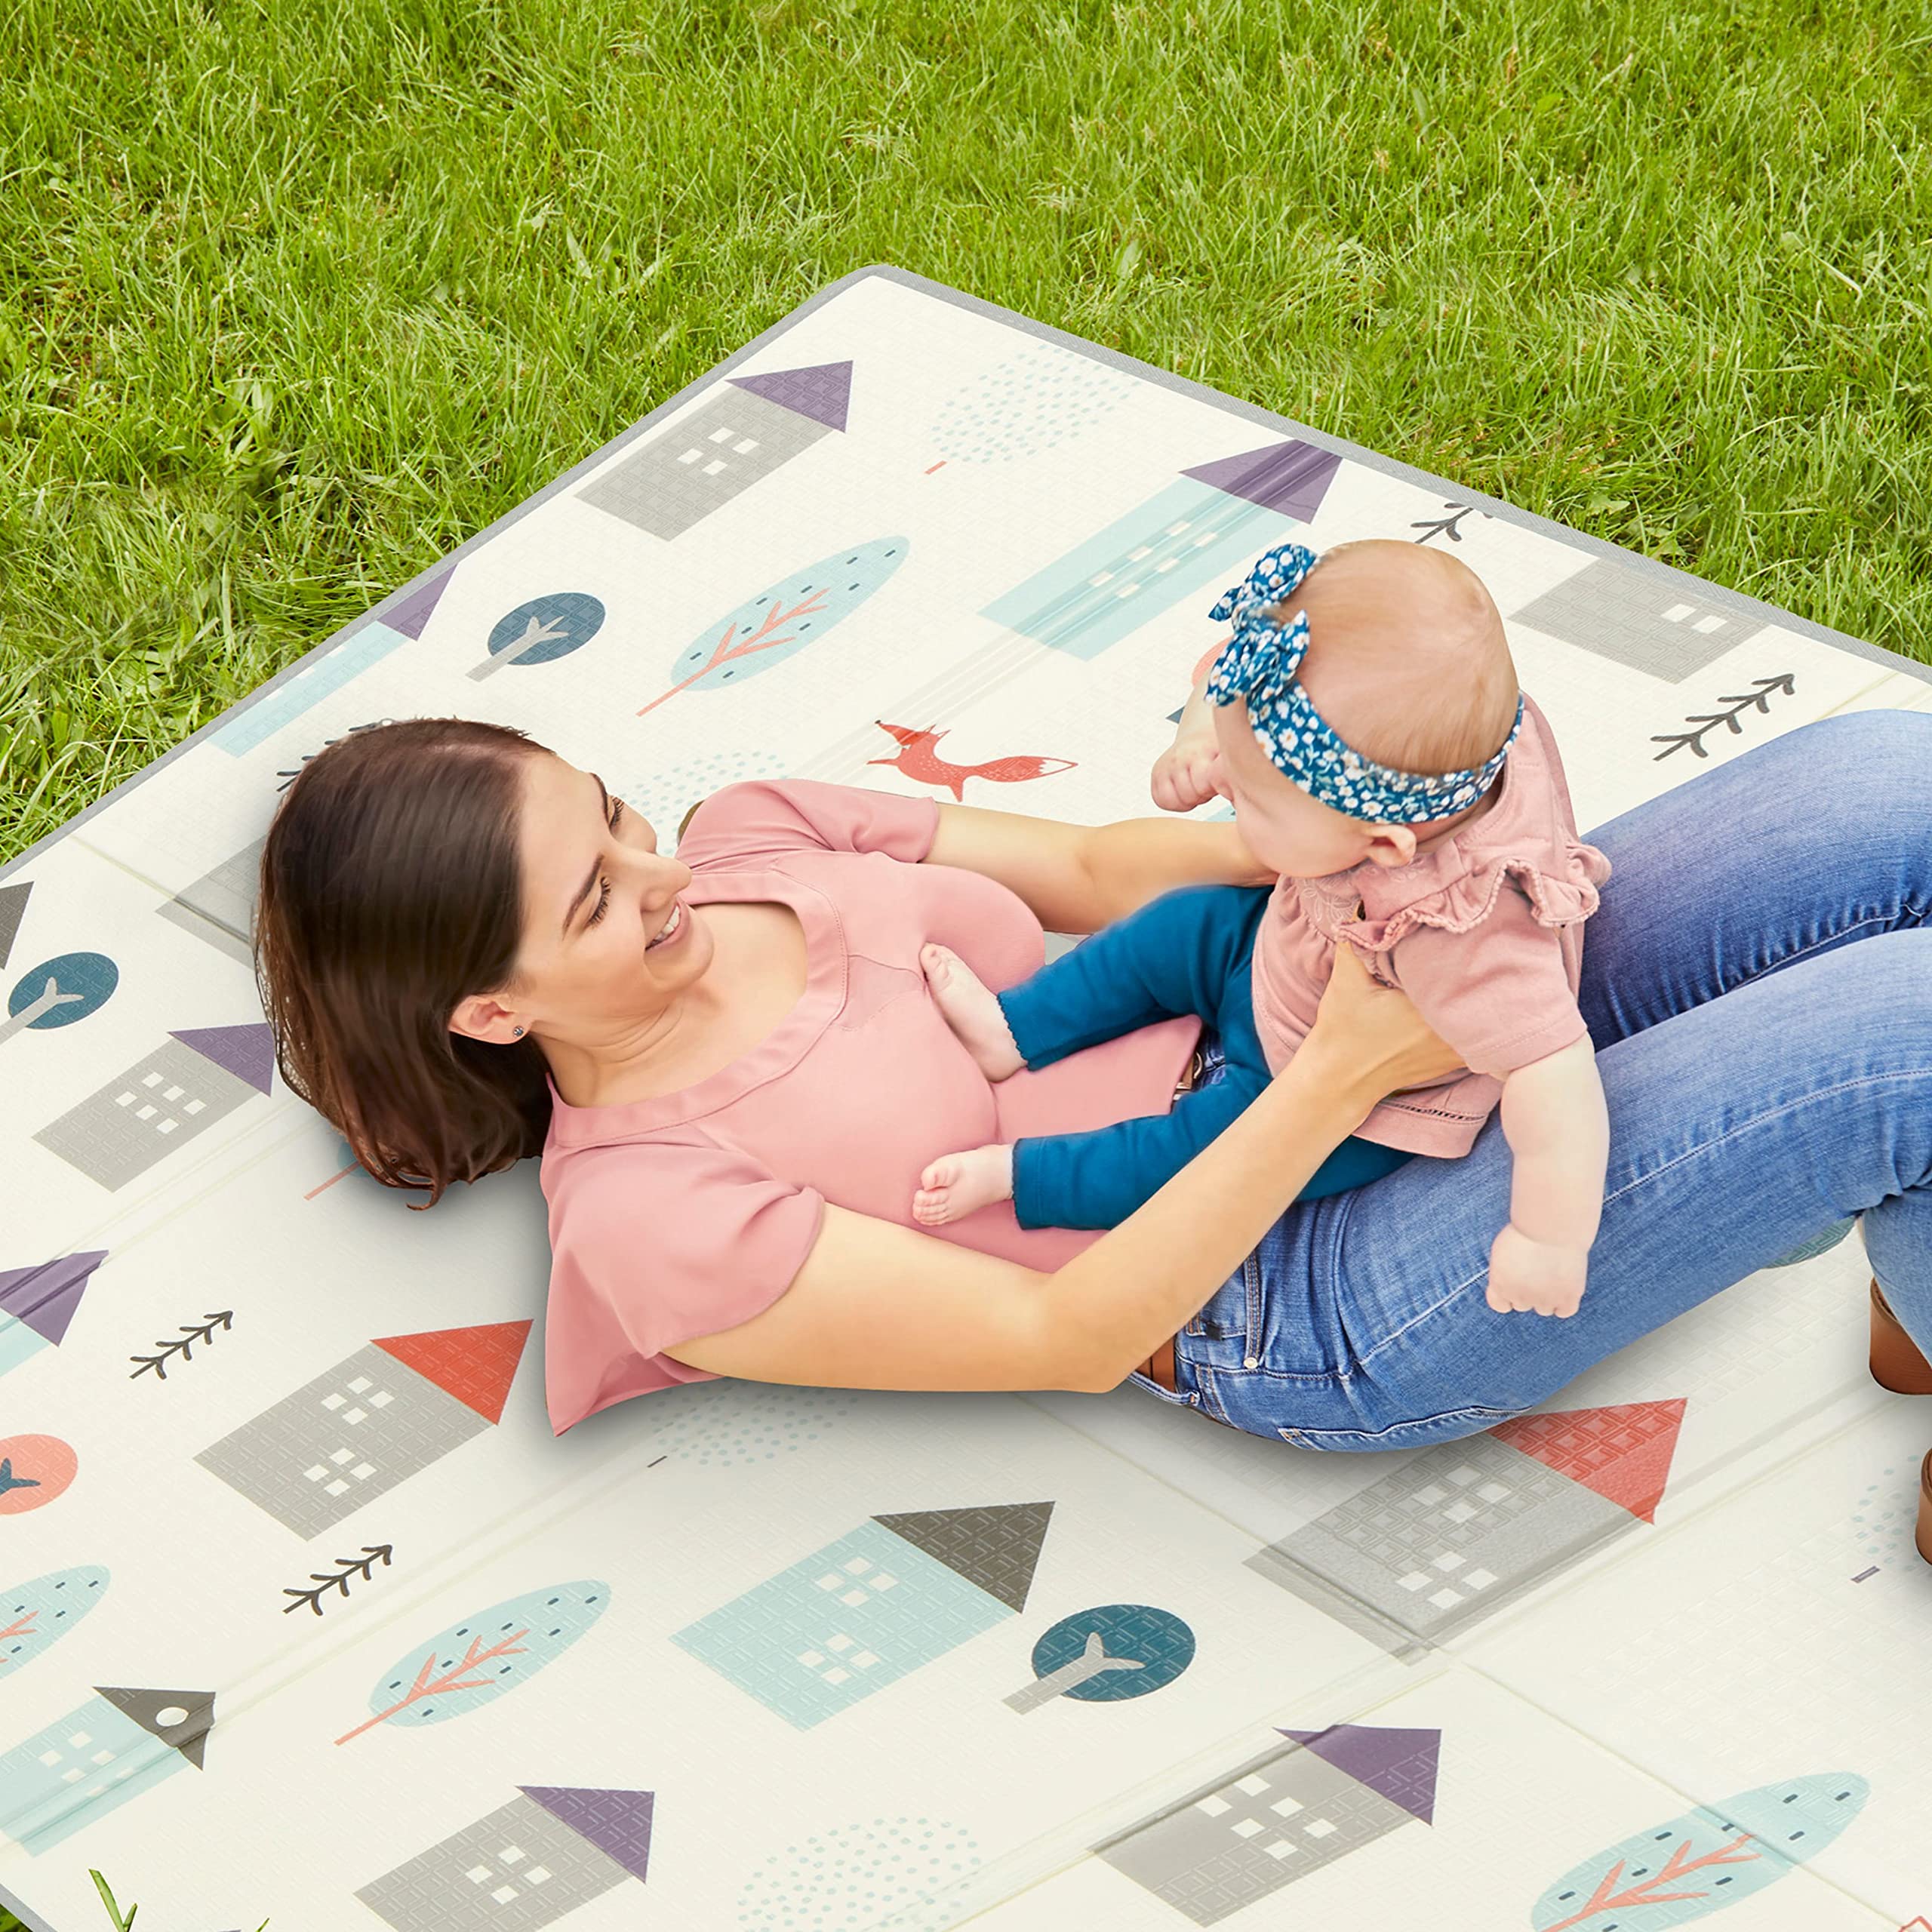 Dream On Me Play Time Reversible Baby Play Mat |Foldable Extra Large Thick Foam Crawling Playmats for Toddlers| Waterproof Portable Playmat for Babies | Yoga/Picnic/Game Mat| Indoor/Outdoor, Multi